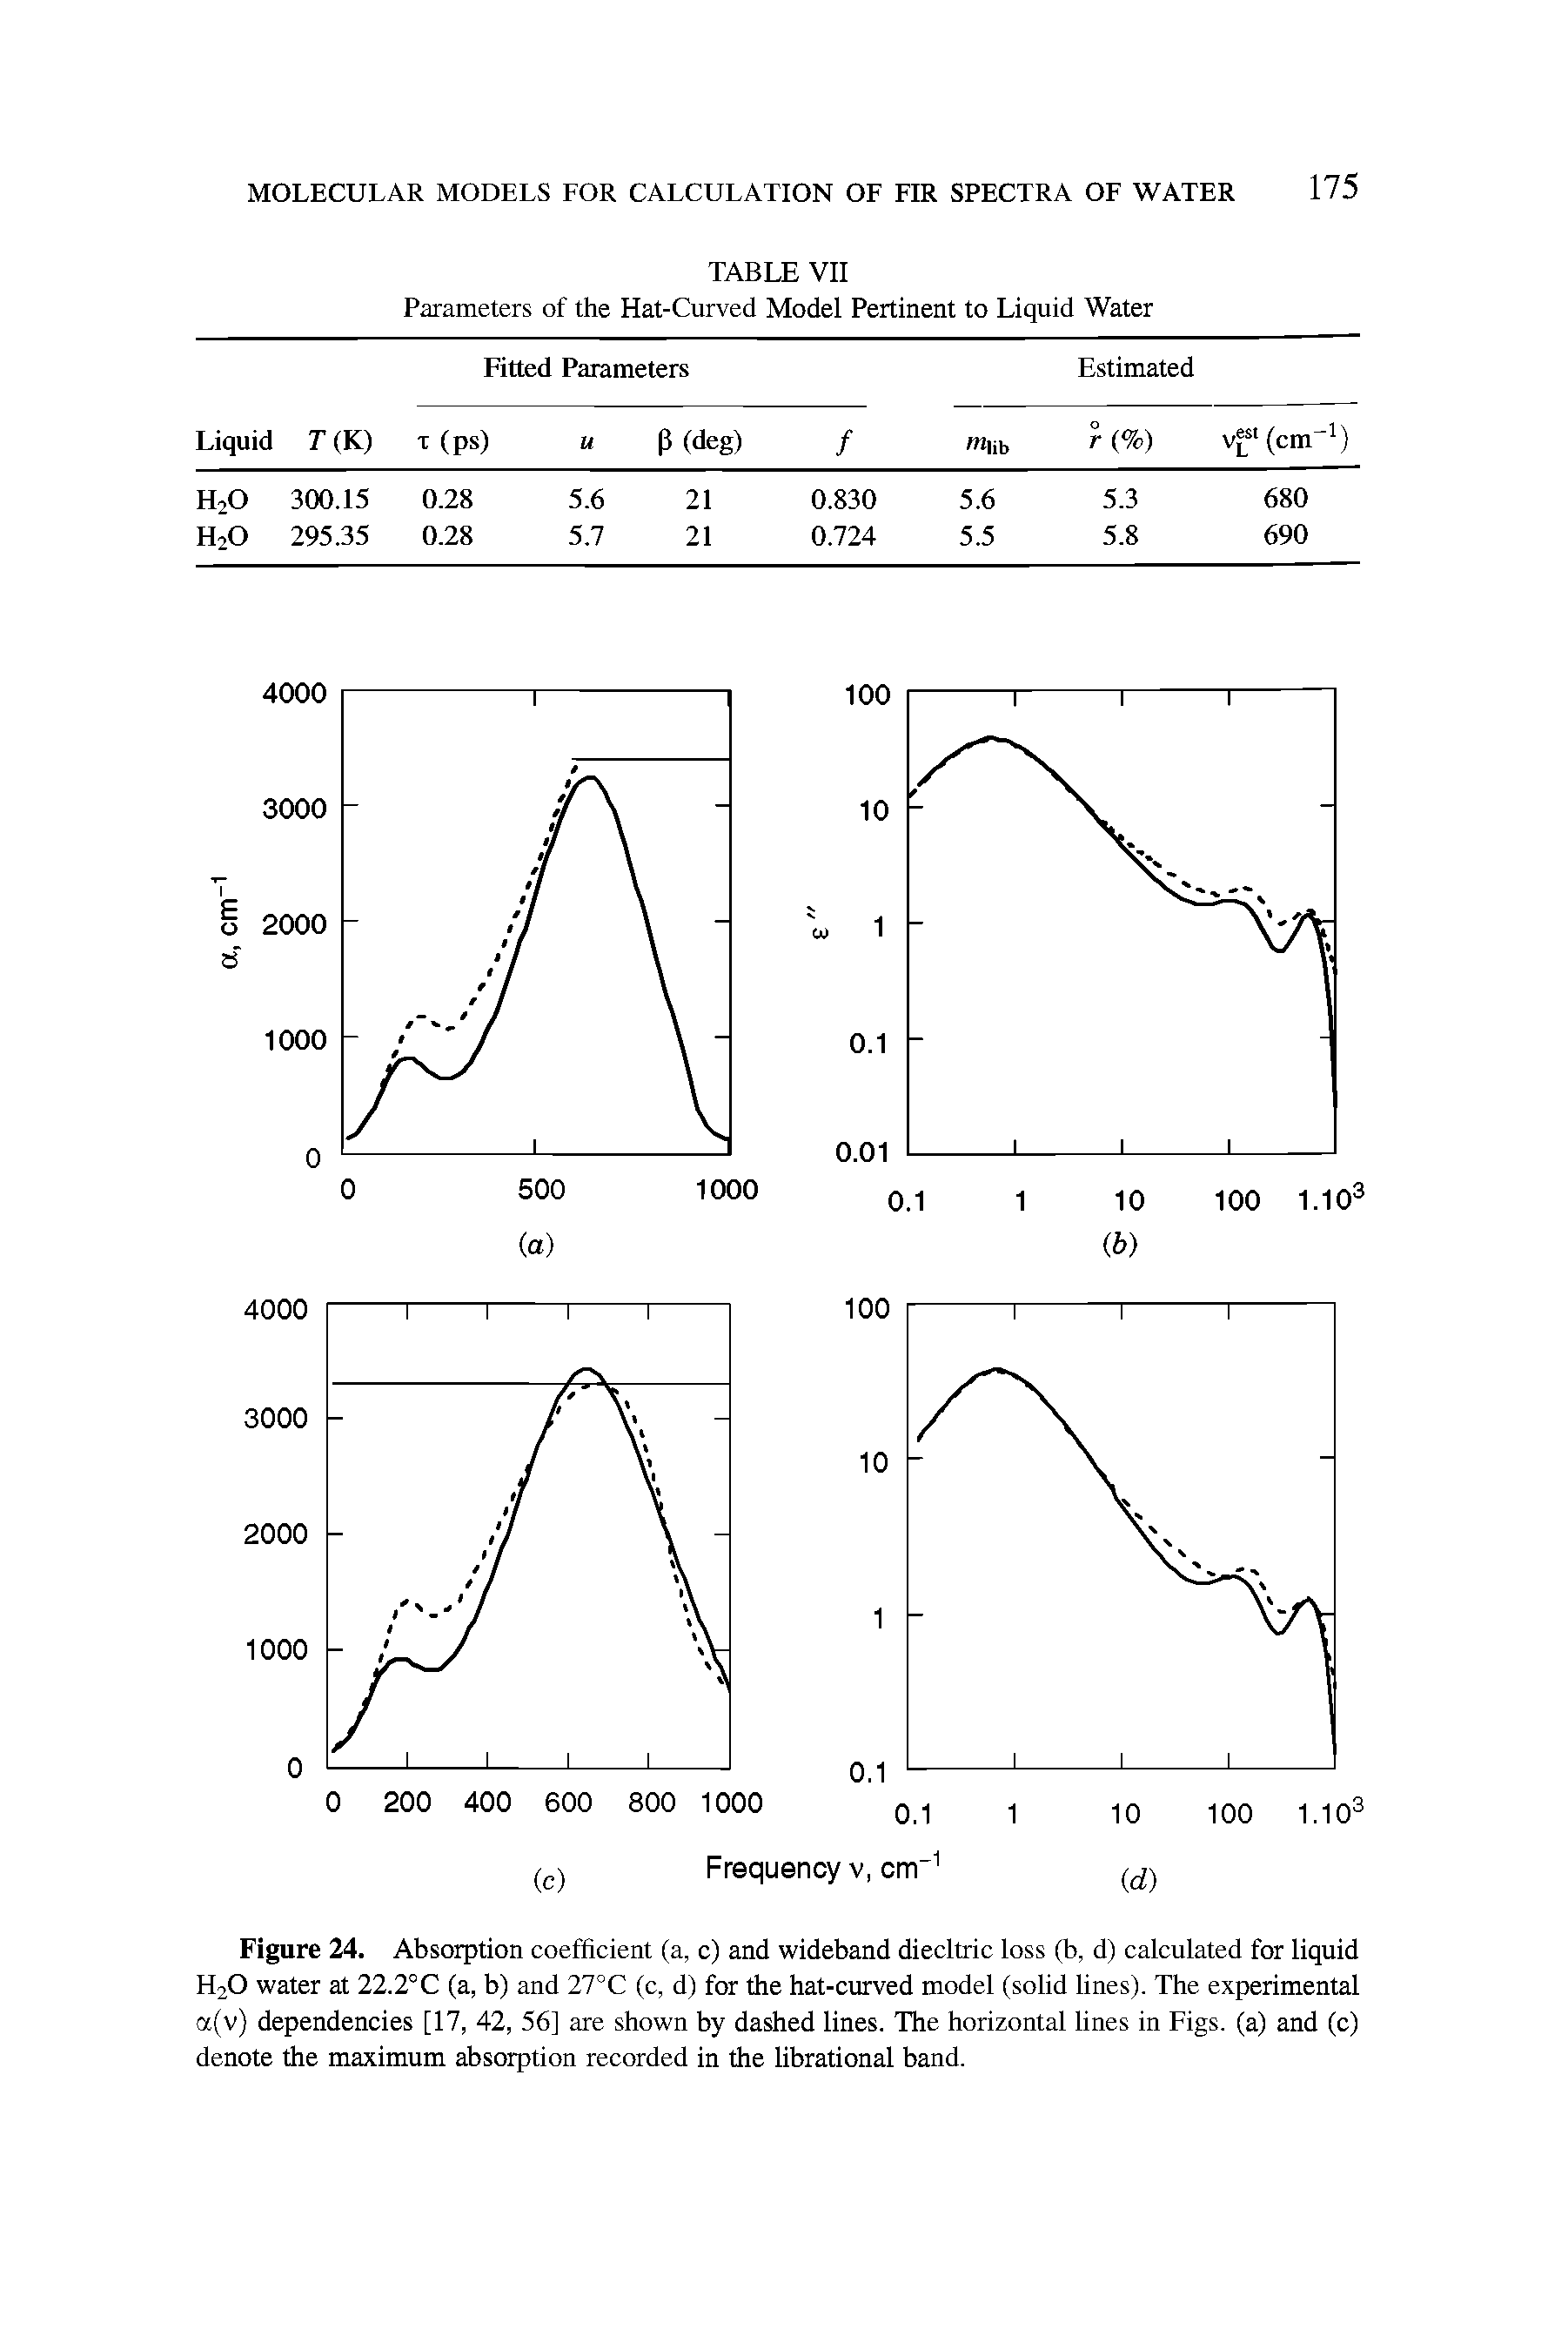 Figure 24. Absorption coefficient (a, c) and wideband diecltric loss (b, d) calculated for liquid H20 water at 22.2°C (a, b) and 27°C (c, d) for the hat-curved model (solid lines). The experimental a(v) dependencies [17, 42, 56] are shown by dashed lines. The horizontal lines in Figs, (a) and (c) denote the maximum absorption recorded in the librational band.